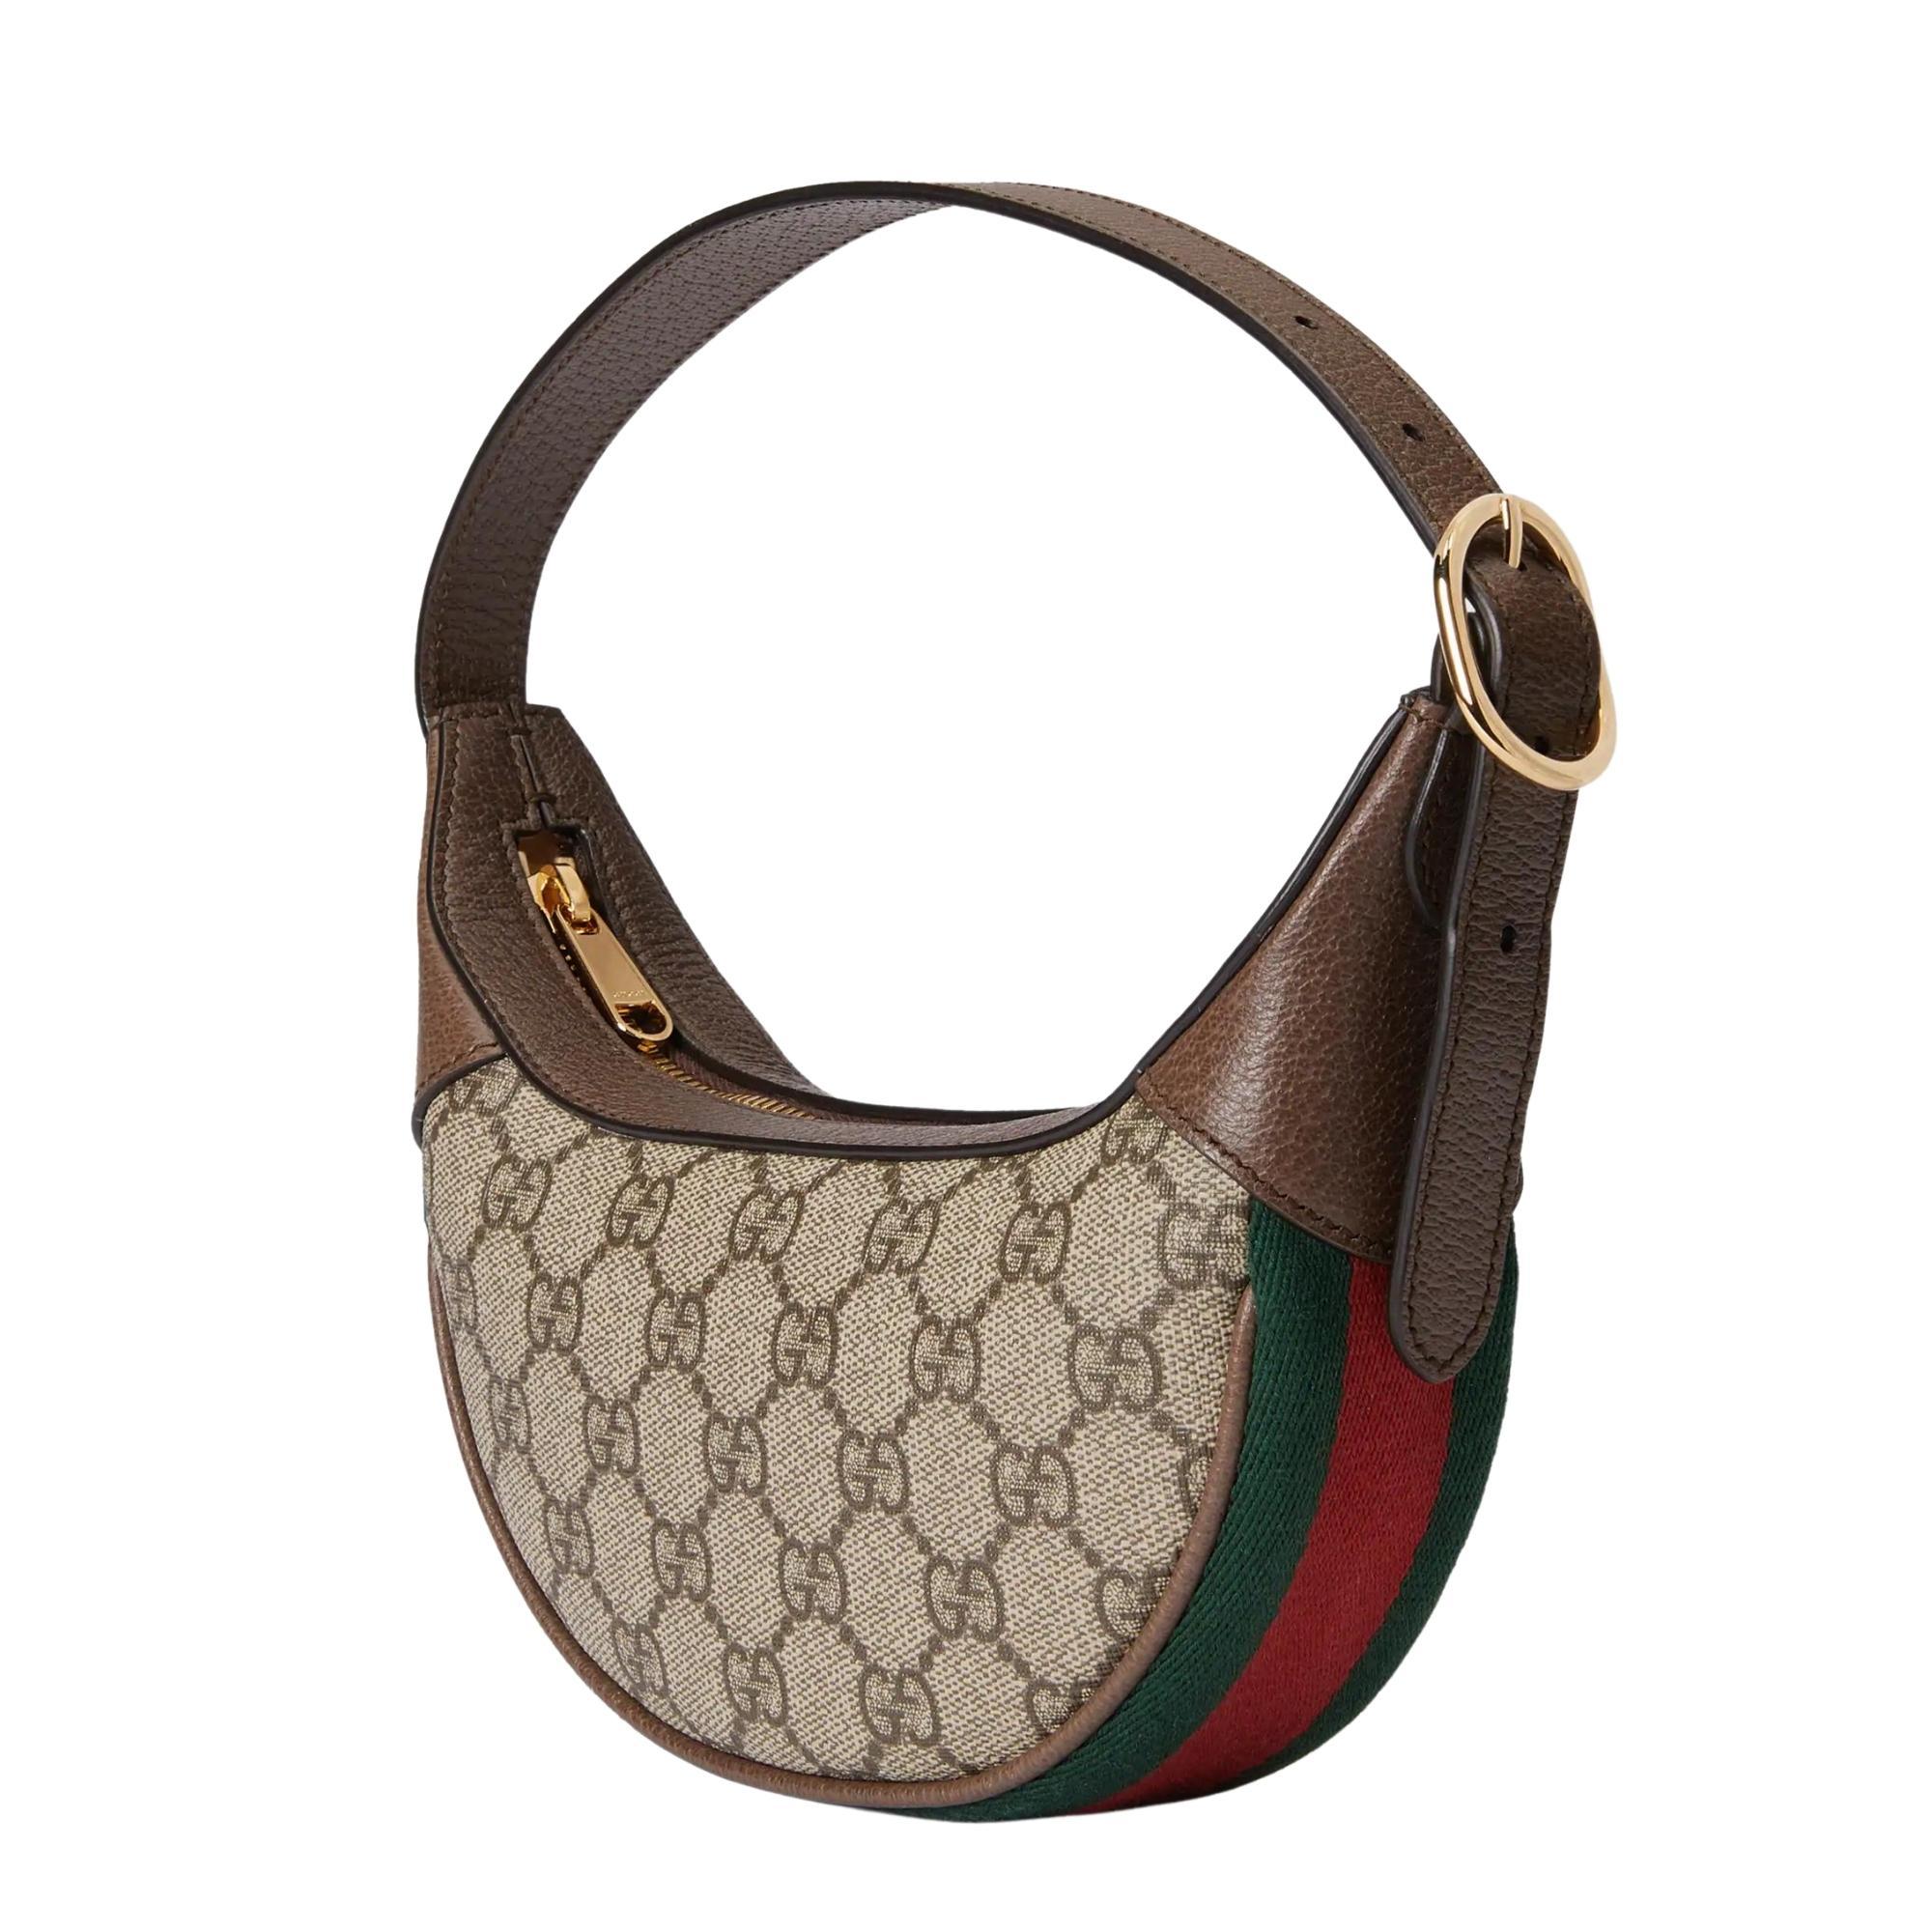 This crescent/croissant shaped mini bag is constructed from the House's monogram canvas. The half-moon silhouette is infused with a retro spirit, recalling '90s designs. The bag features beige and ebony GG Supreme canvas, brown leather trim, a green